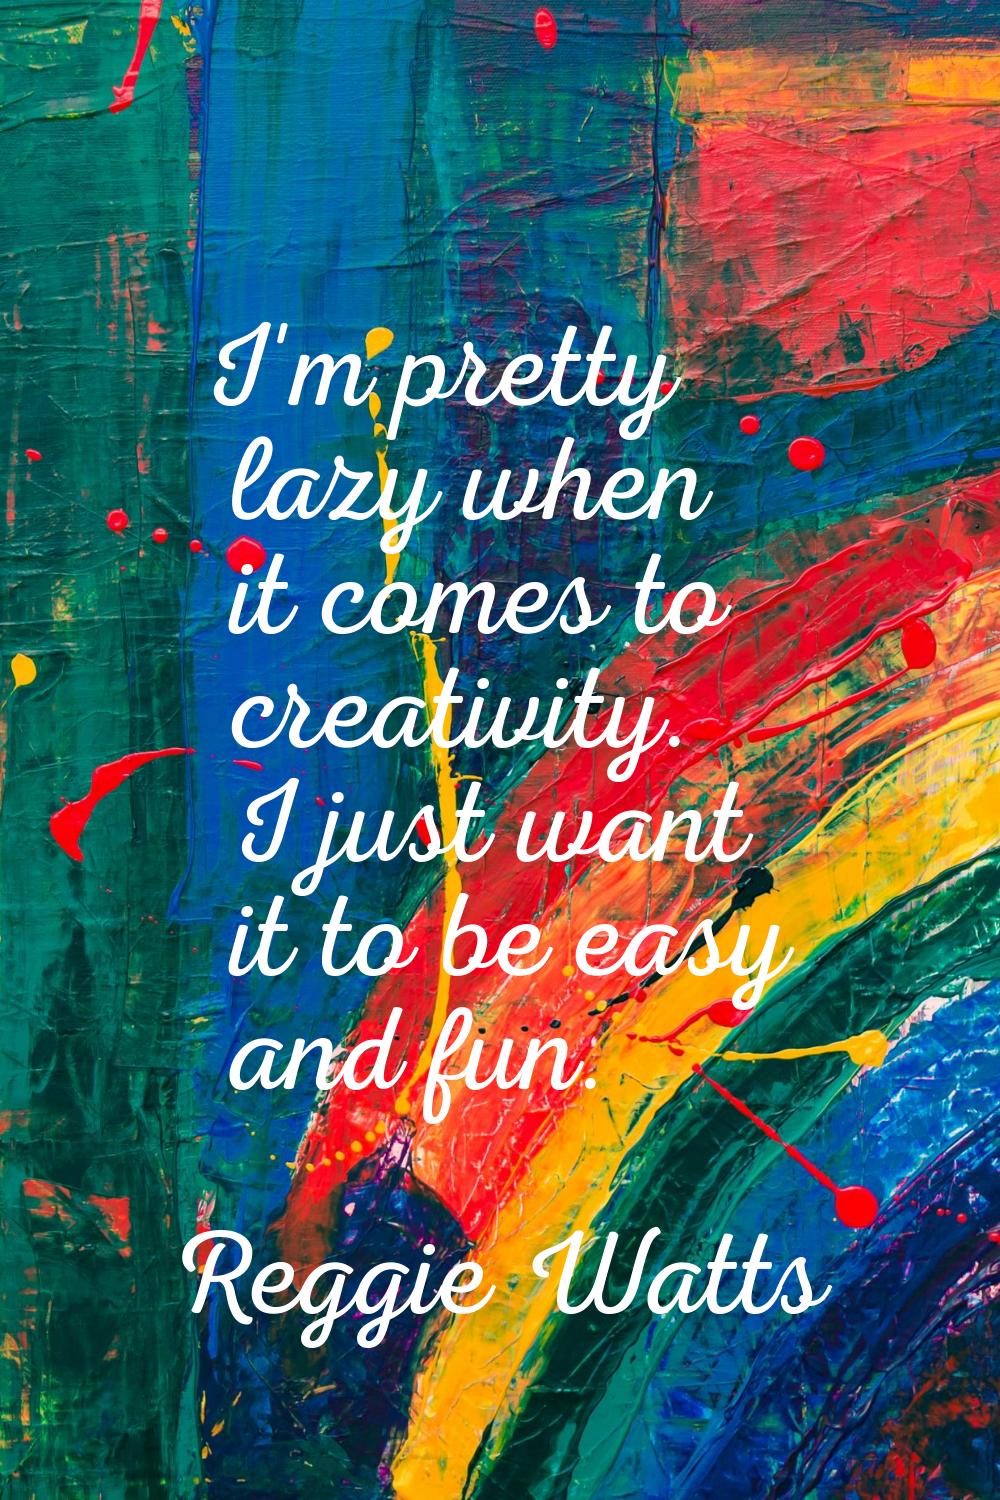 I'm pretty lazy when it comes to creativity. I just want it to be easy and fun.